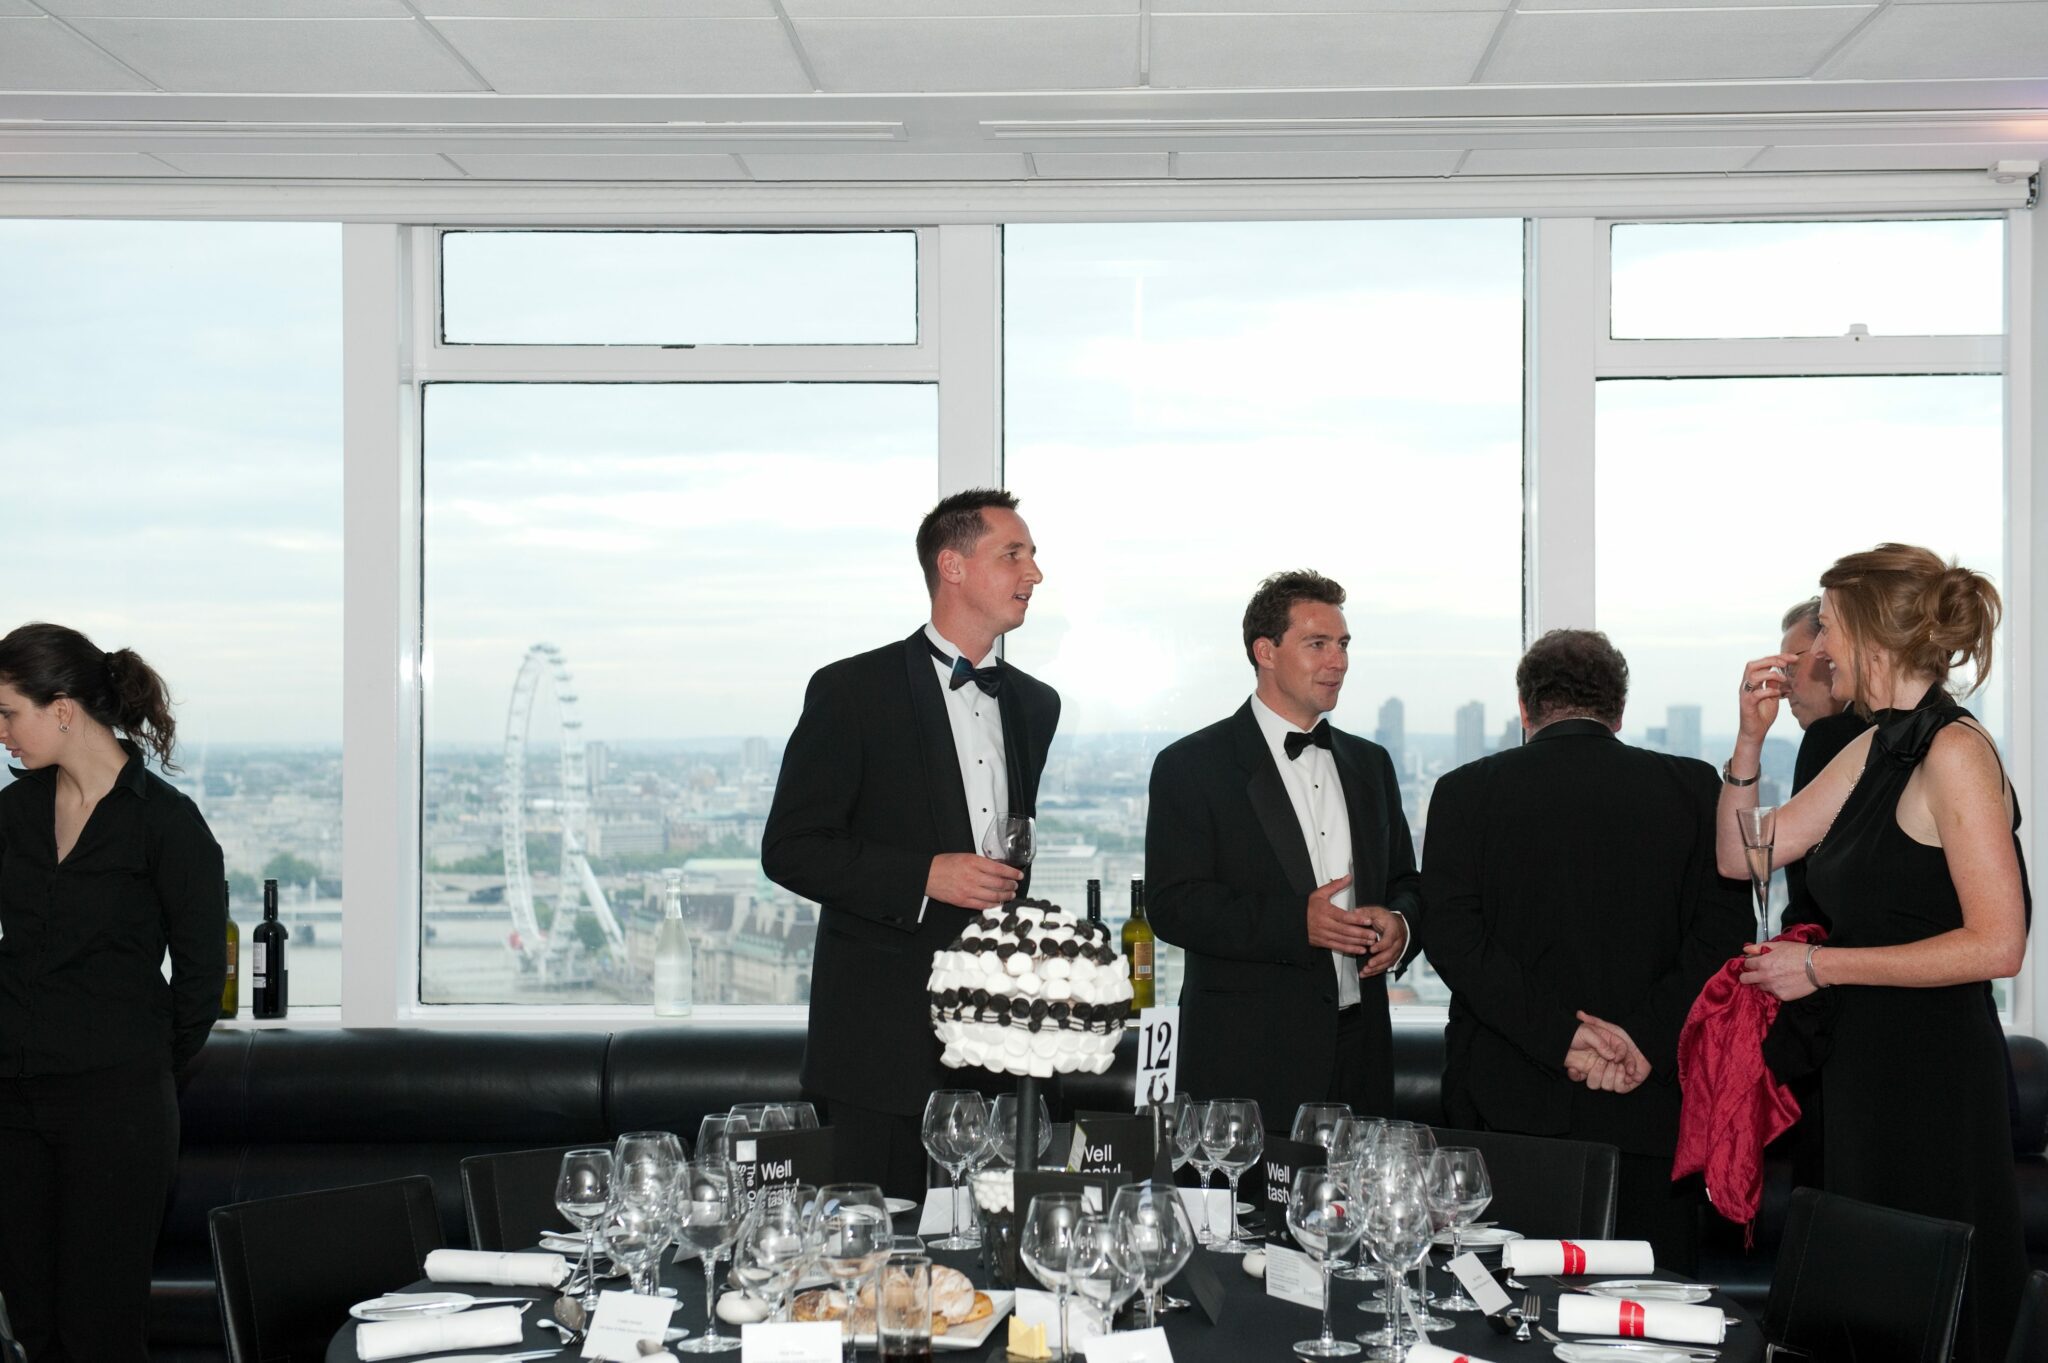 GOSH Charity Dinner Event | View of the London Eye